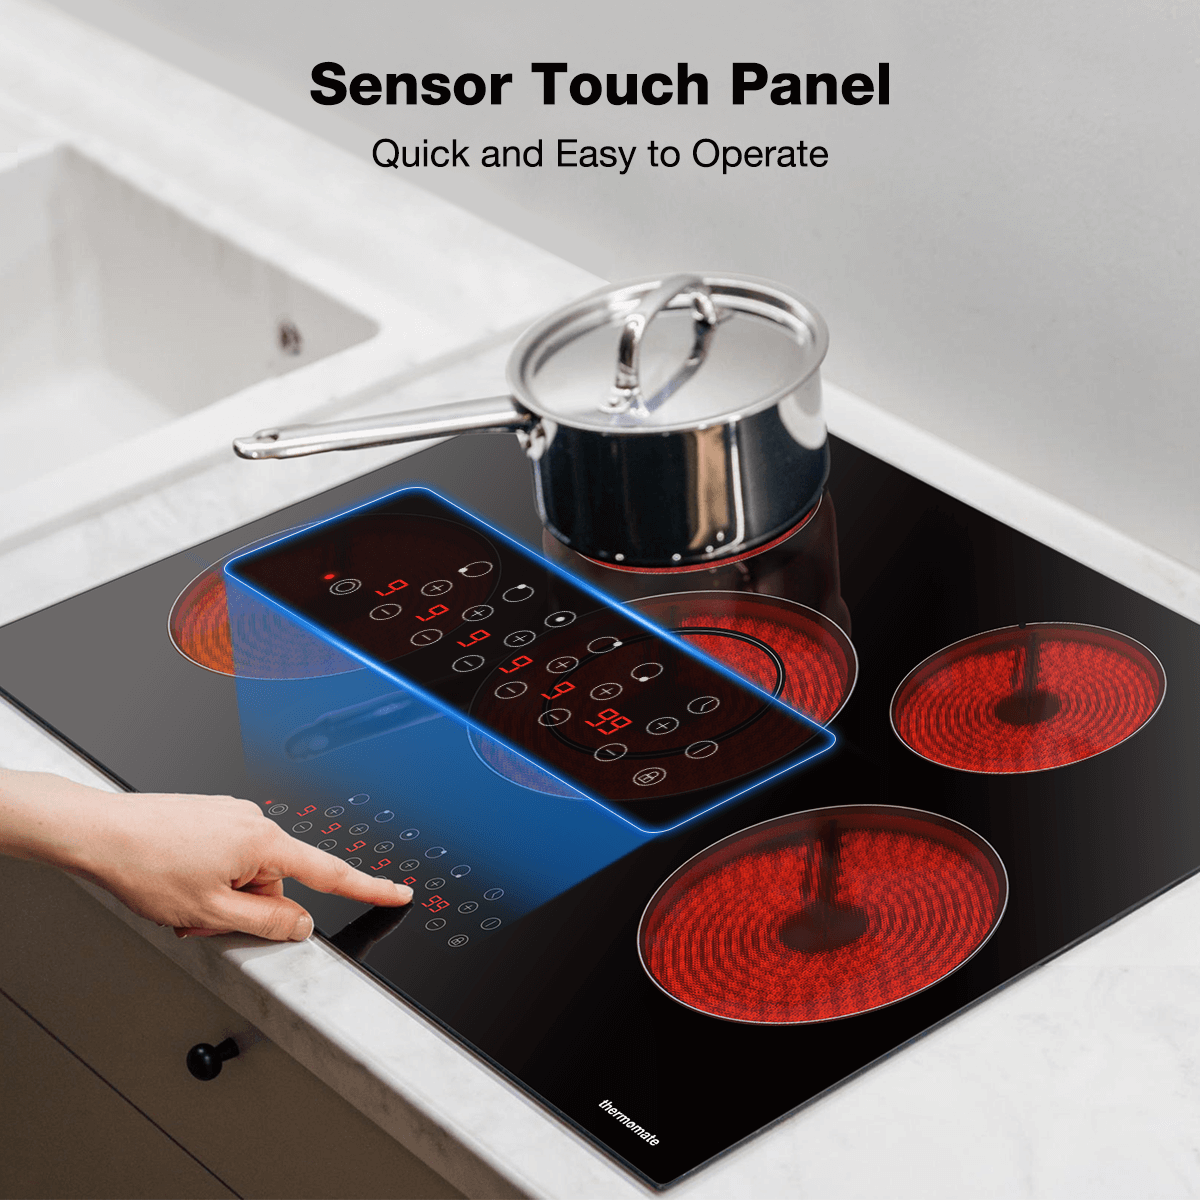 Sensor Touch Panel | Thermomate